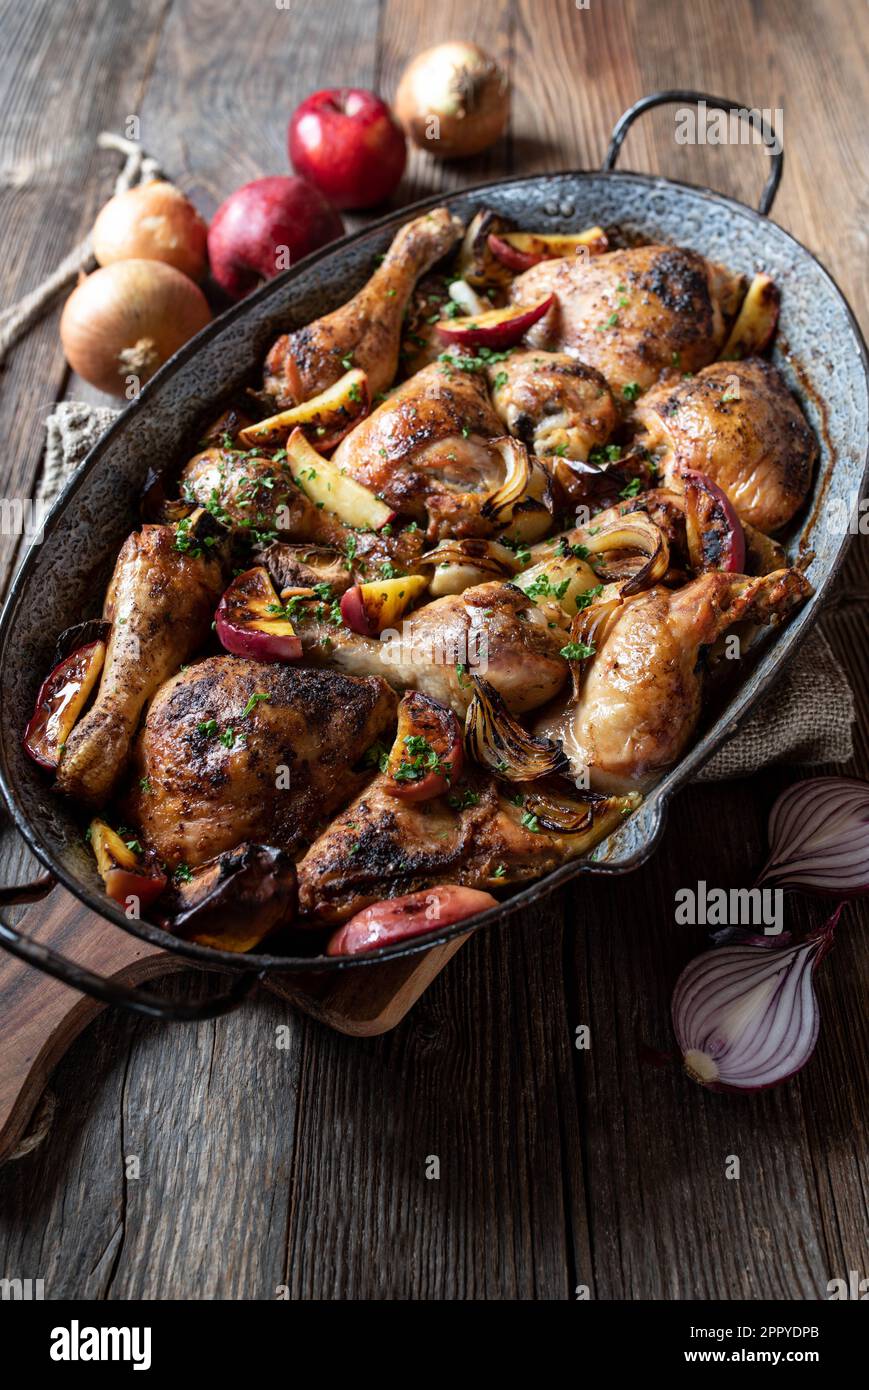 Braised chicken with onions and apples in a old fashioned roasting pan isolated on wooden table Stock Photo